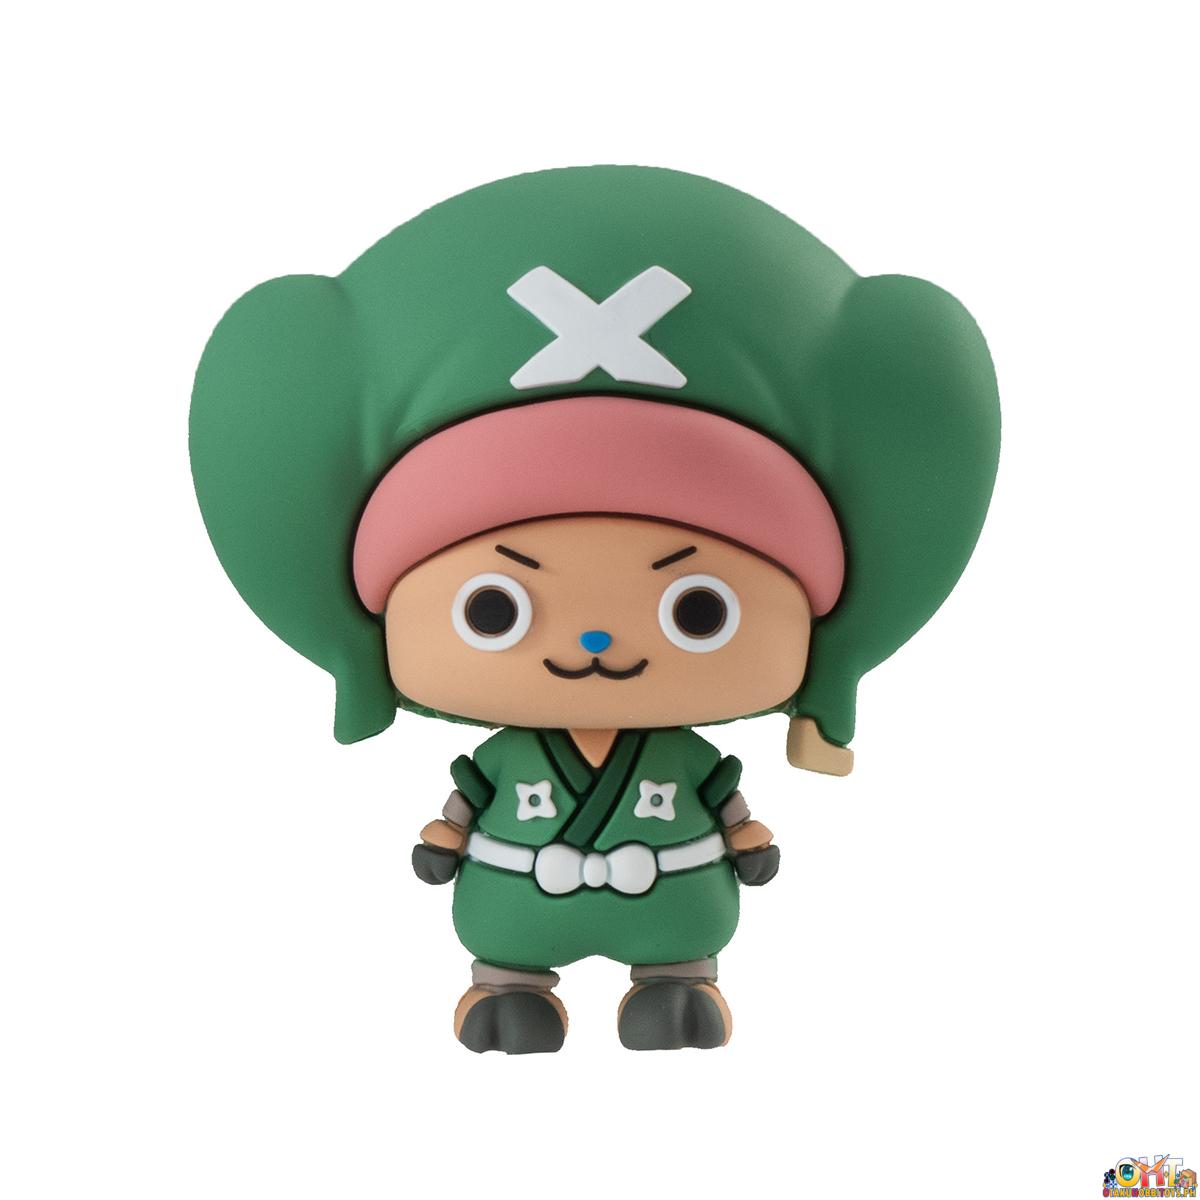 Megahouse Chokorin One Piece Wano Country Edition [Set of 6]